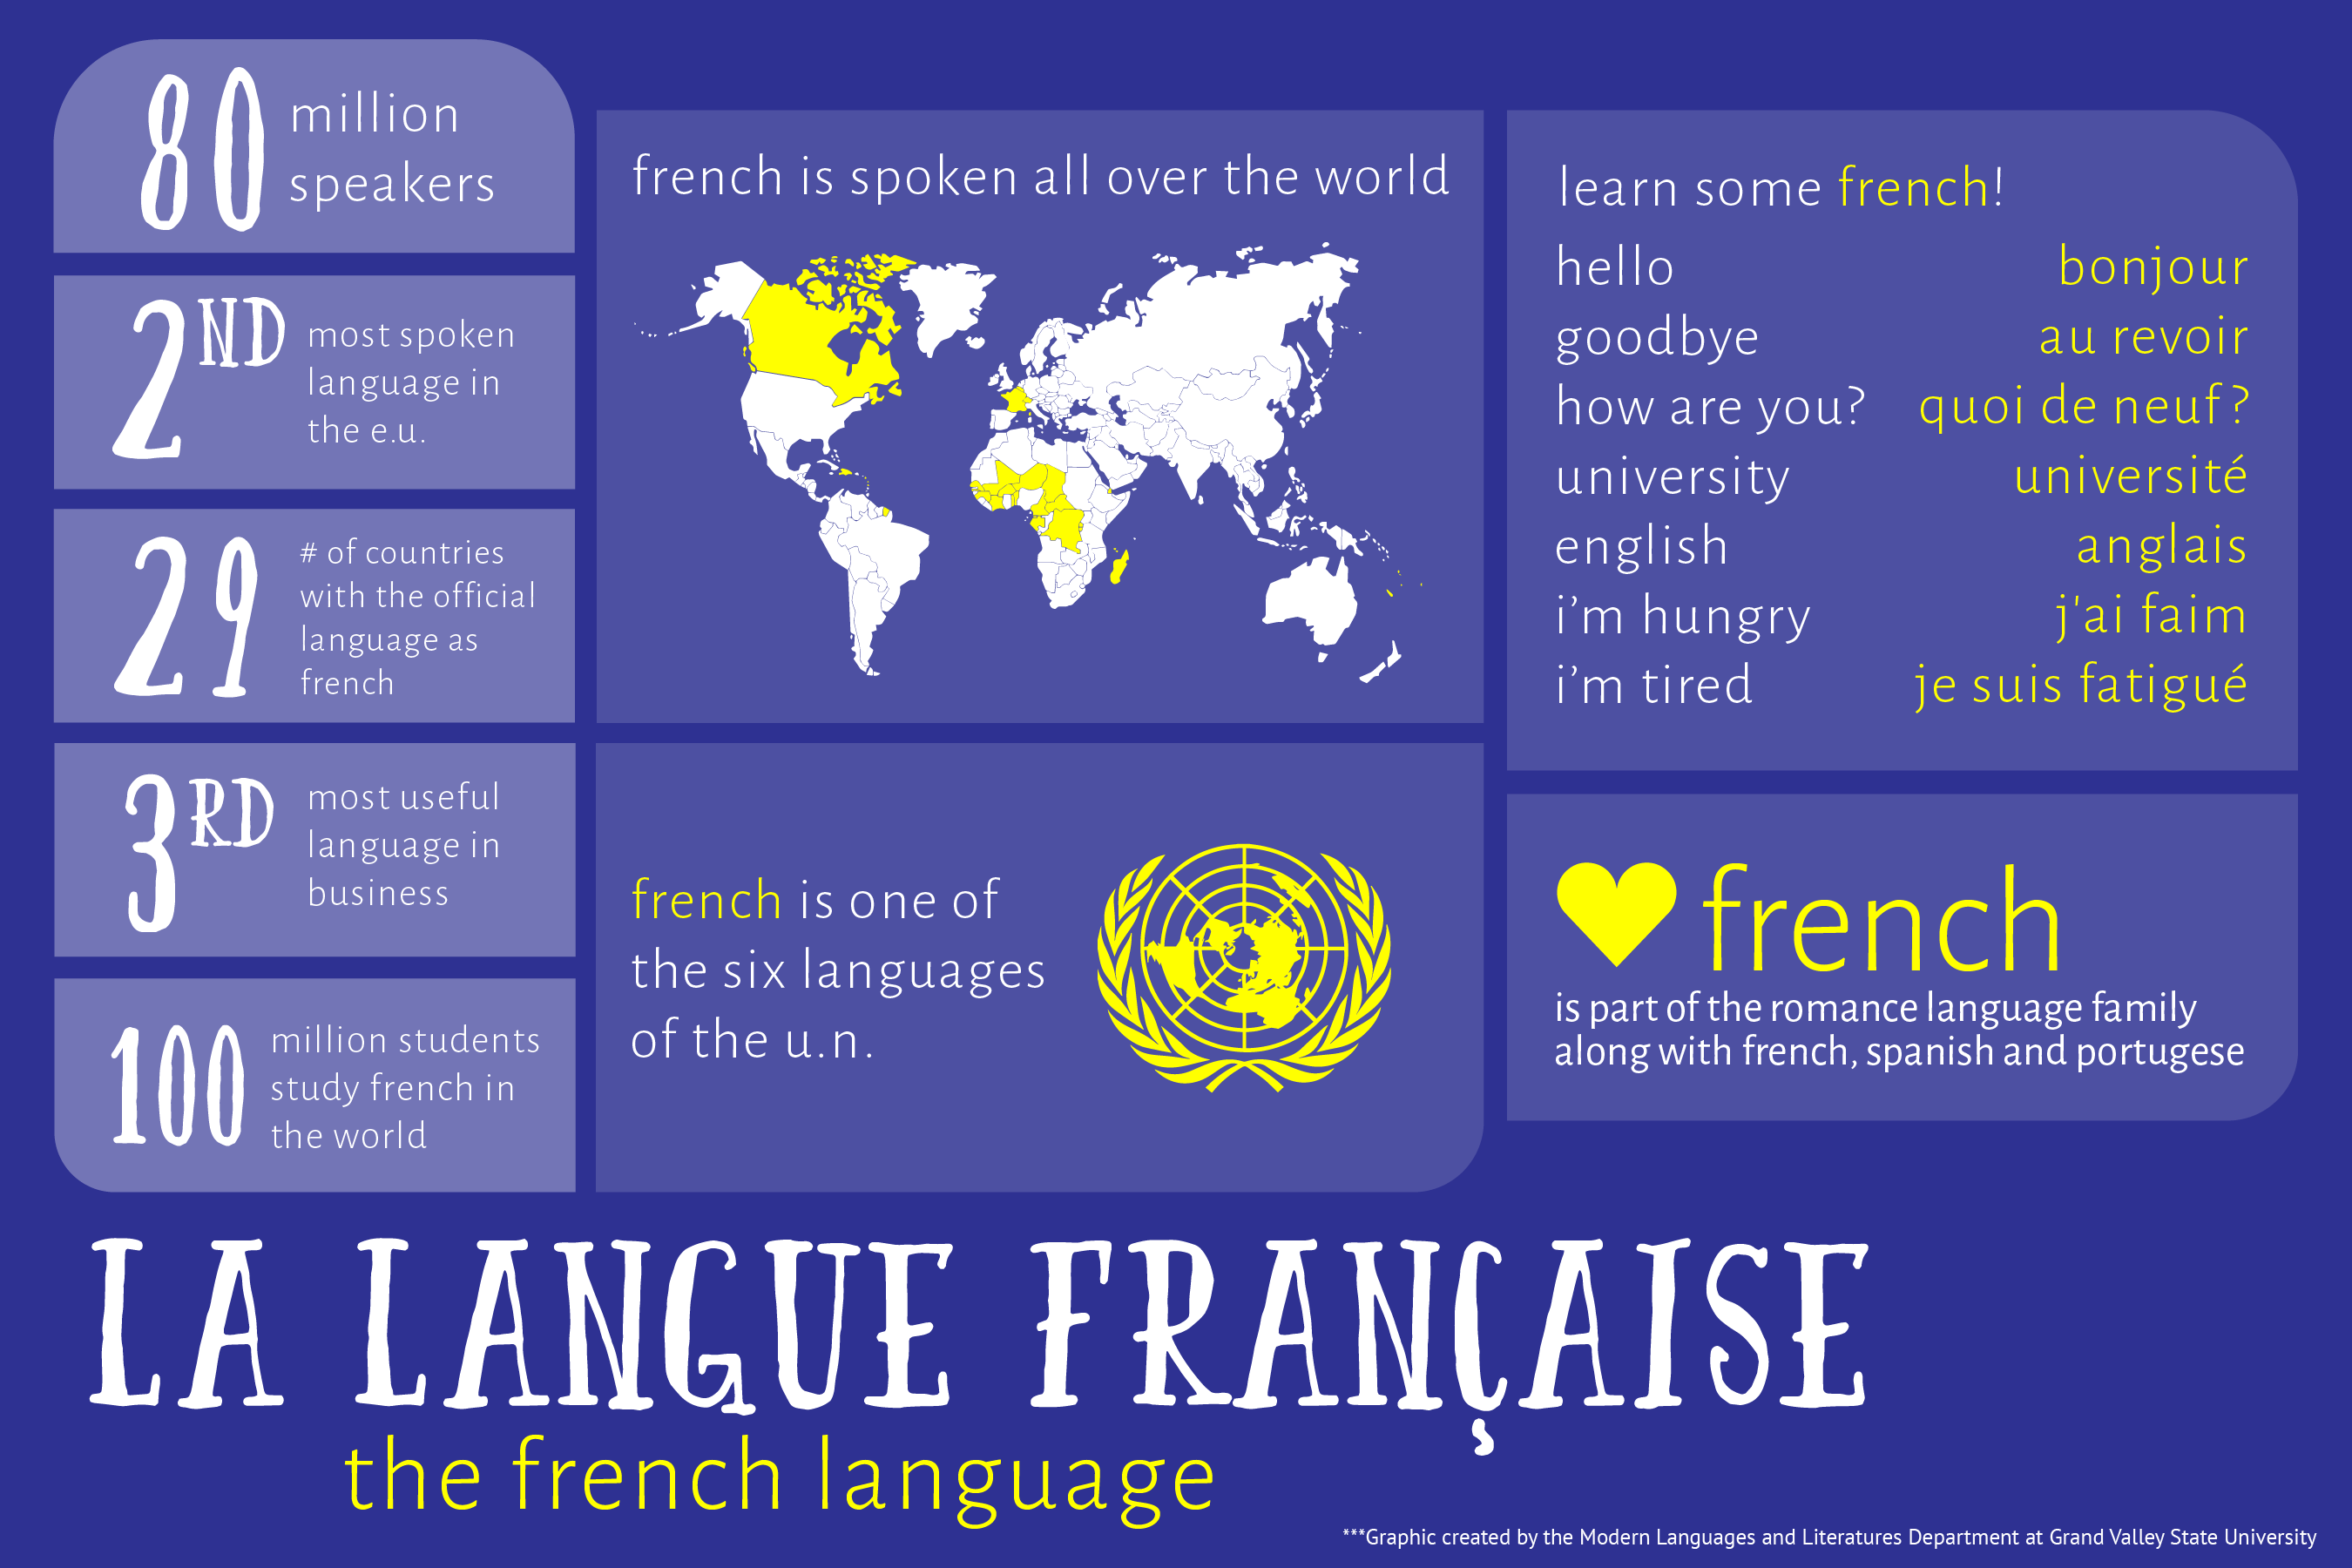 Take a french. Official language of France. Languages in French. Modern languages. English and French languages.